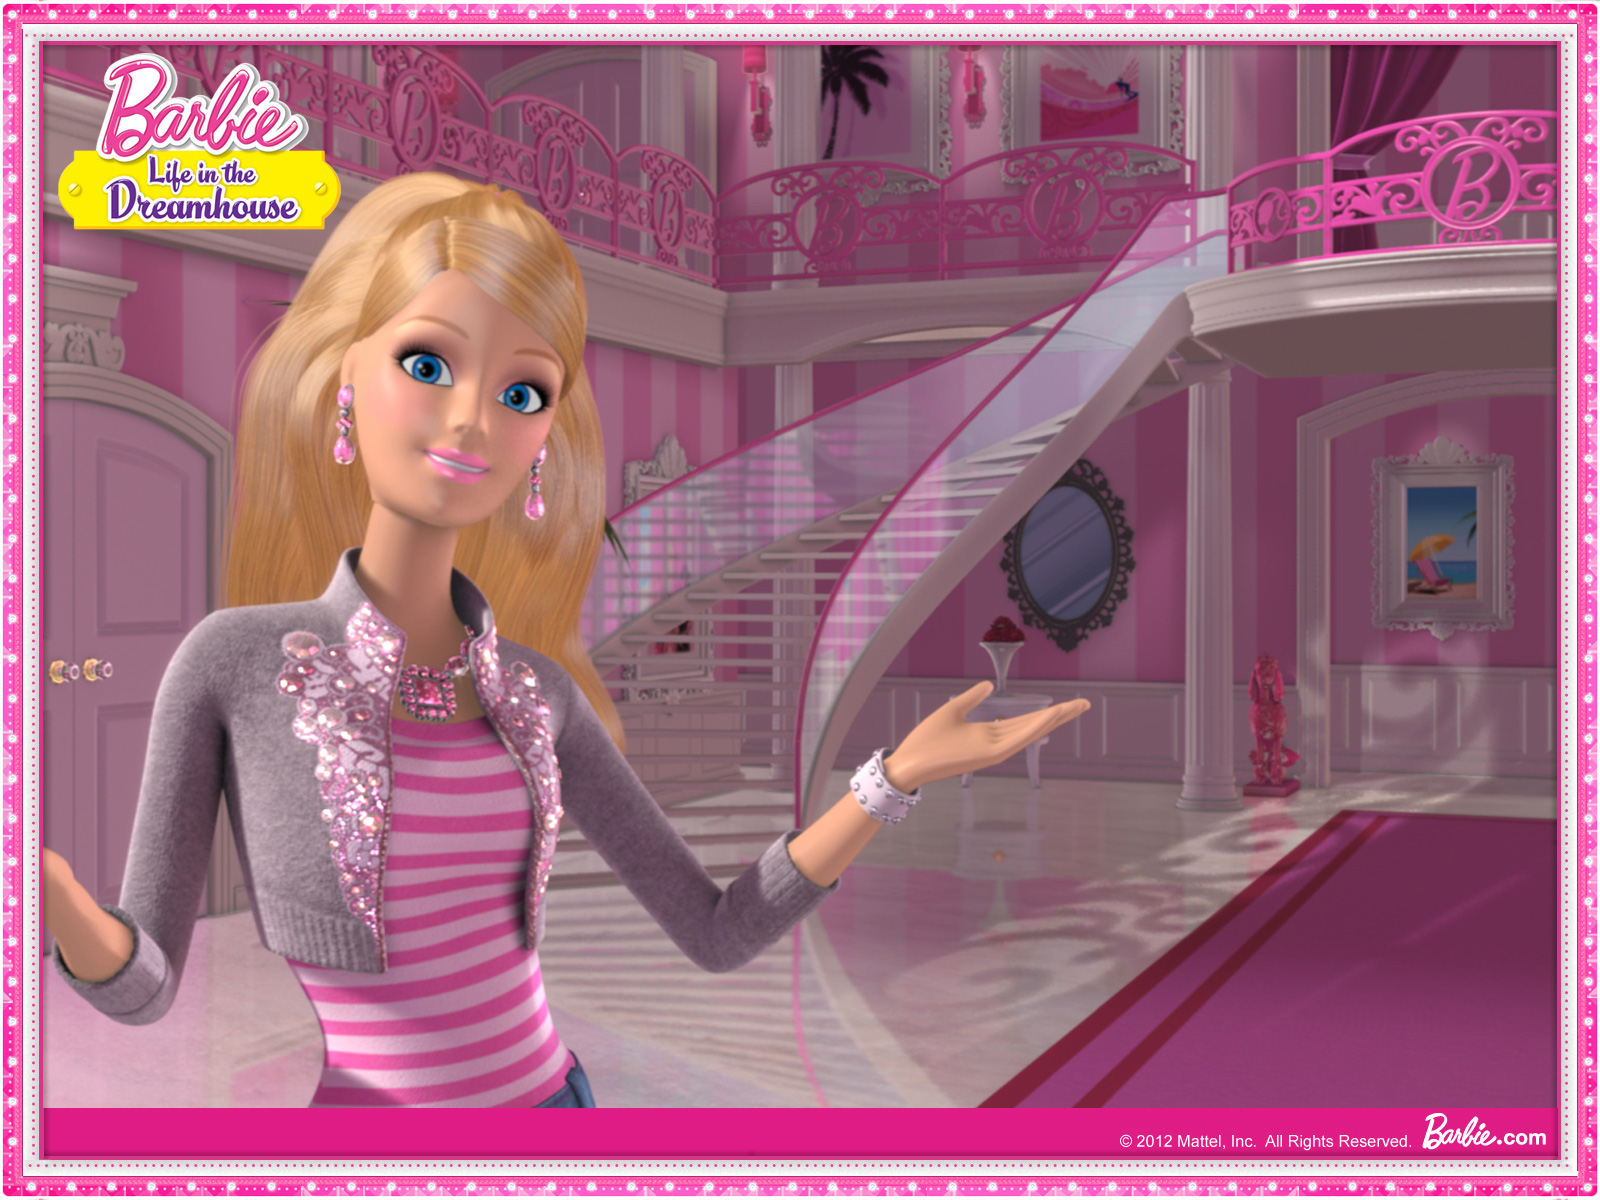 Free Download Barbie Life in The Dreamhouse Background